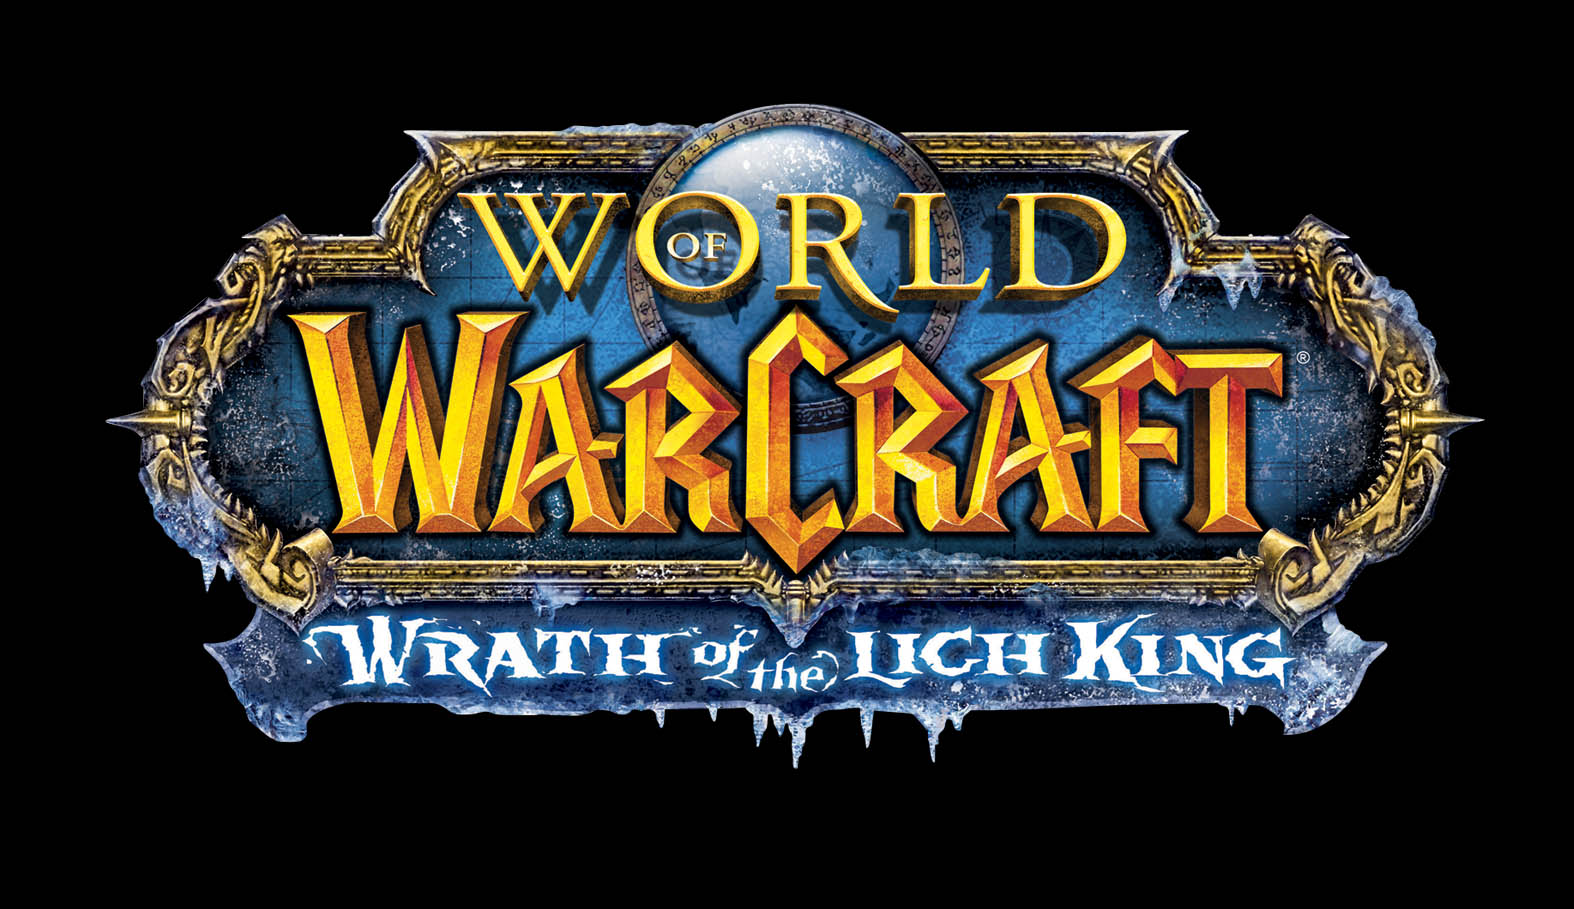 http://uoem.com/wp-content/uploads/2010/08/WOW_Wrath_of_the_Lich_King1.jpg